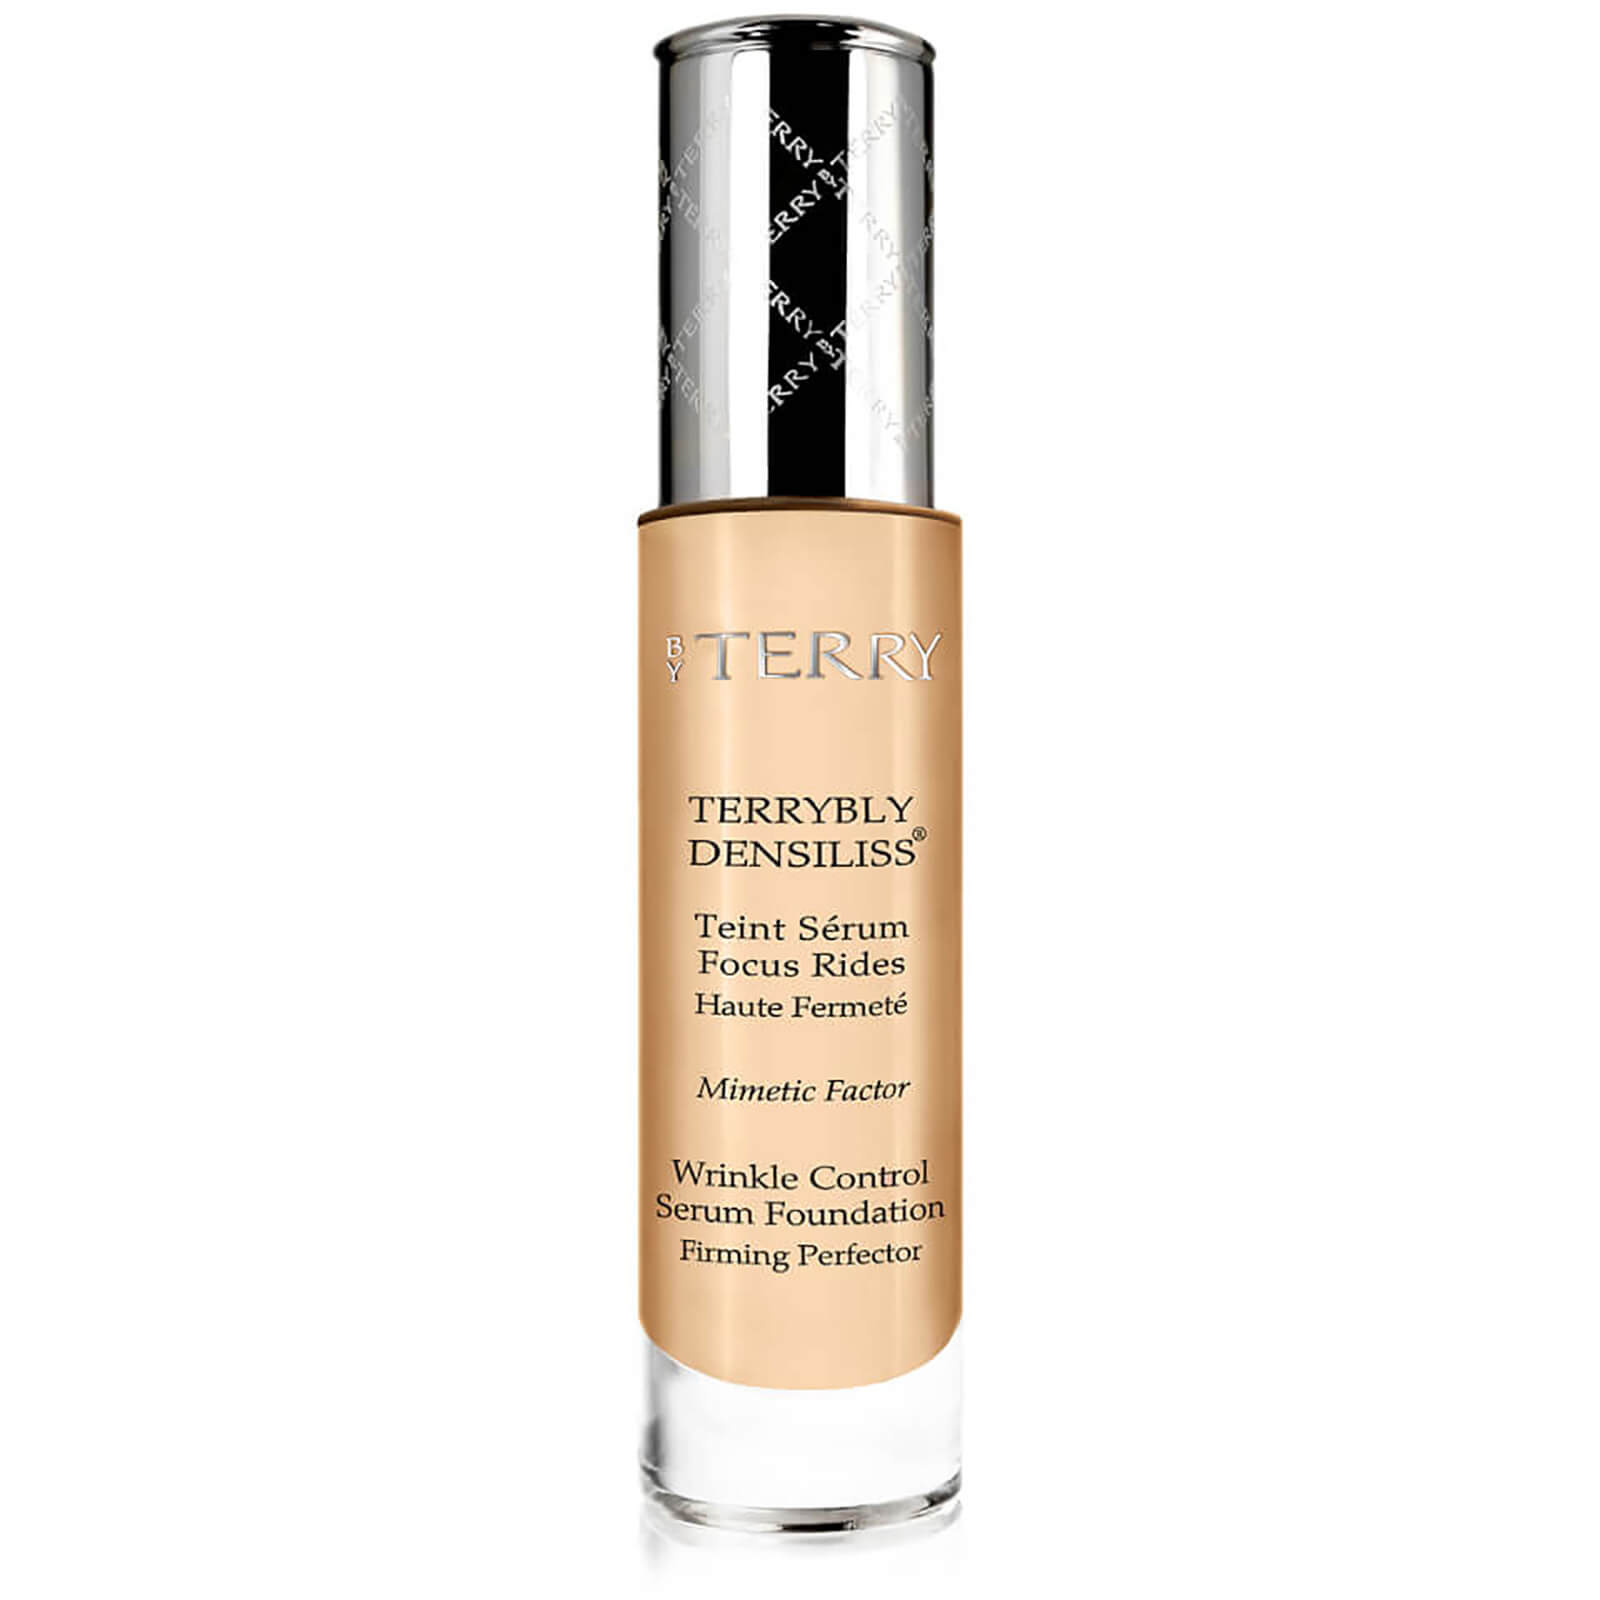 By Terry Terrybly Densiliss Foundation 30ml (Various Shades) - 12 2. Cream Ivory